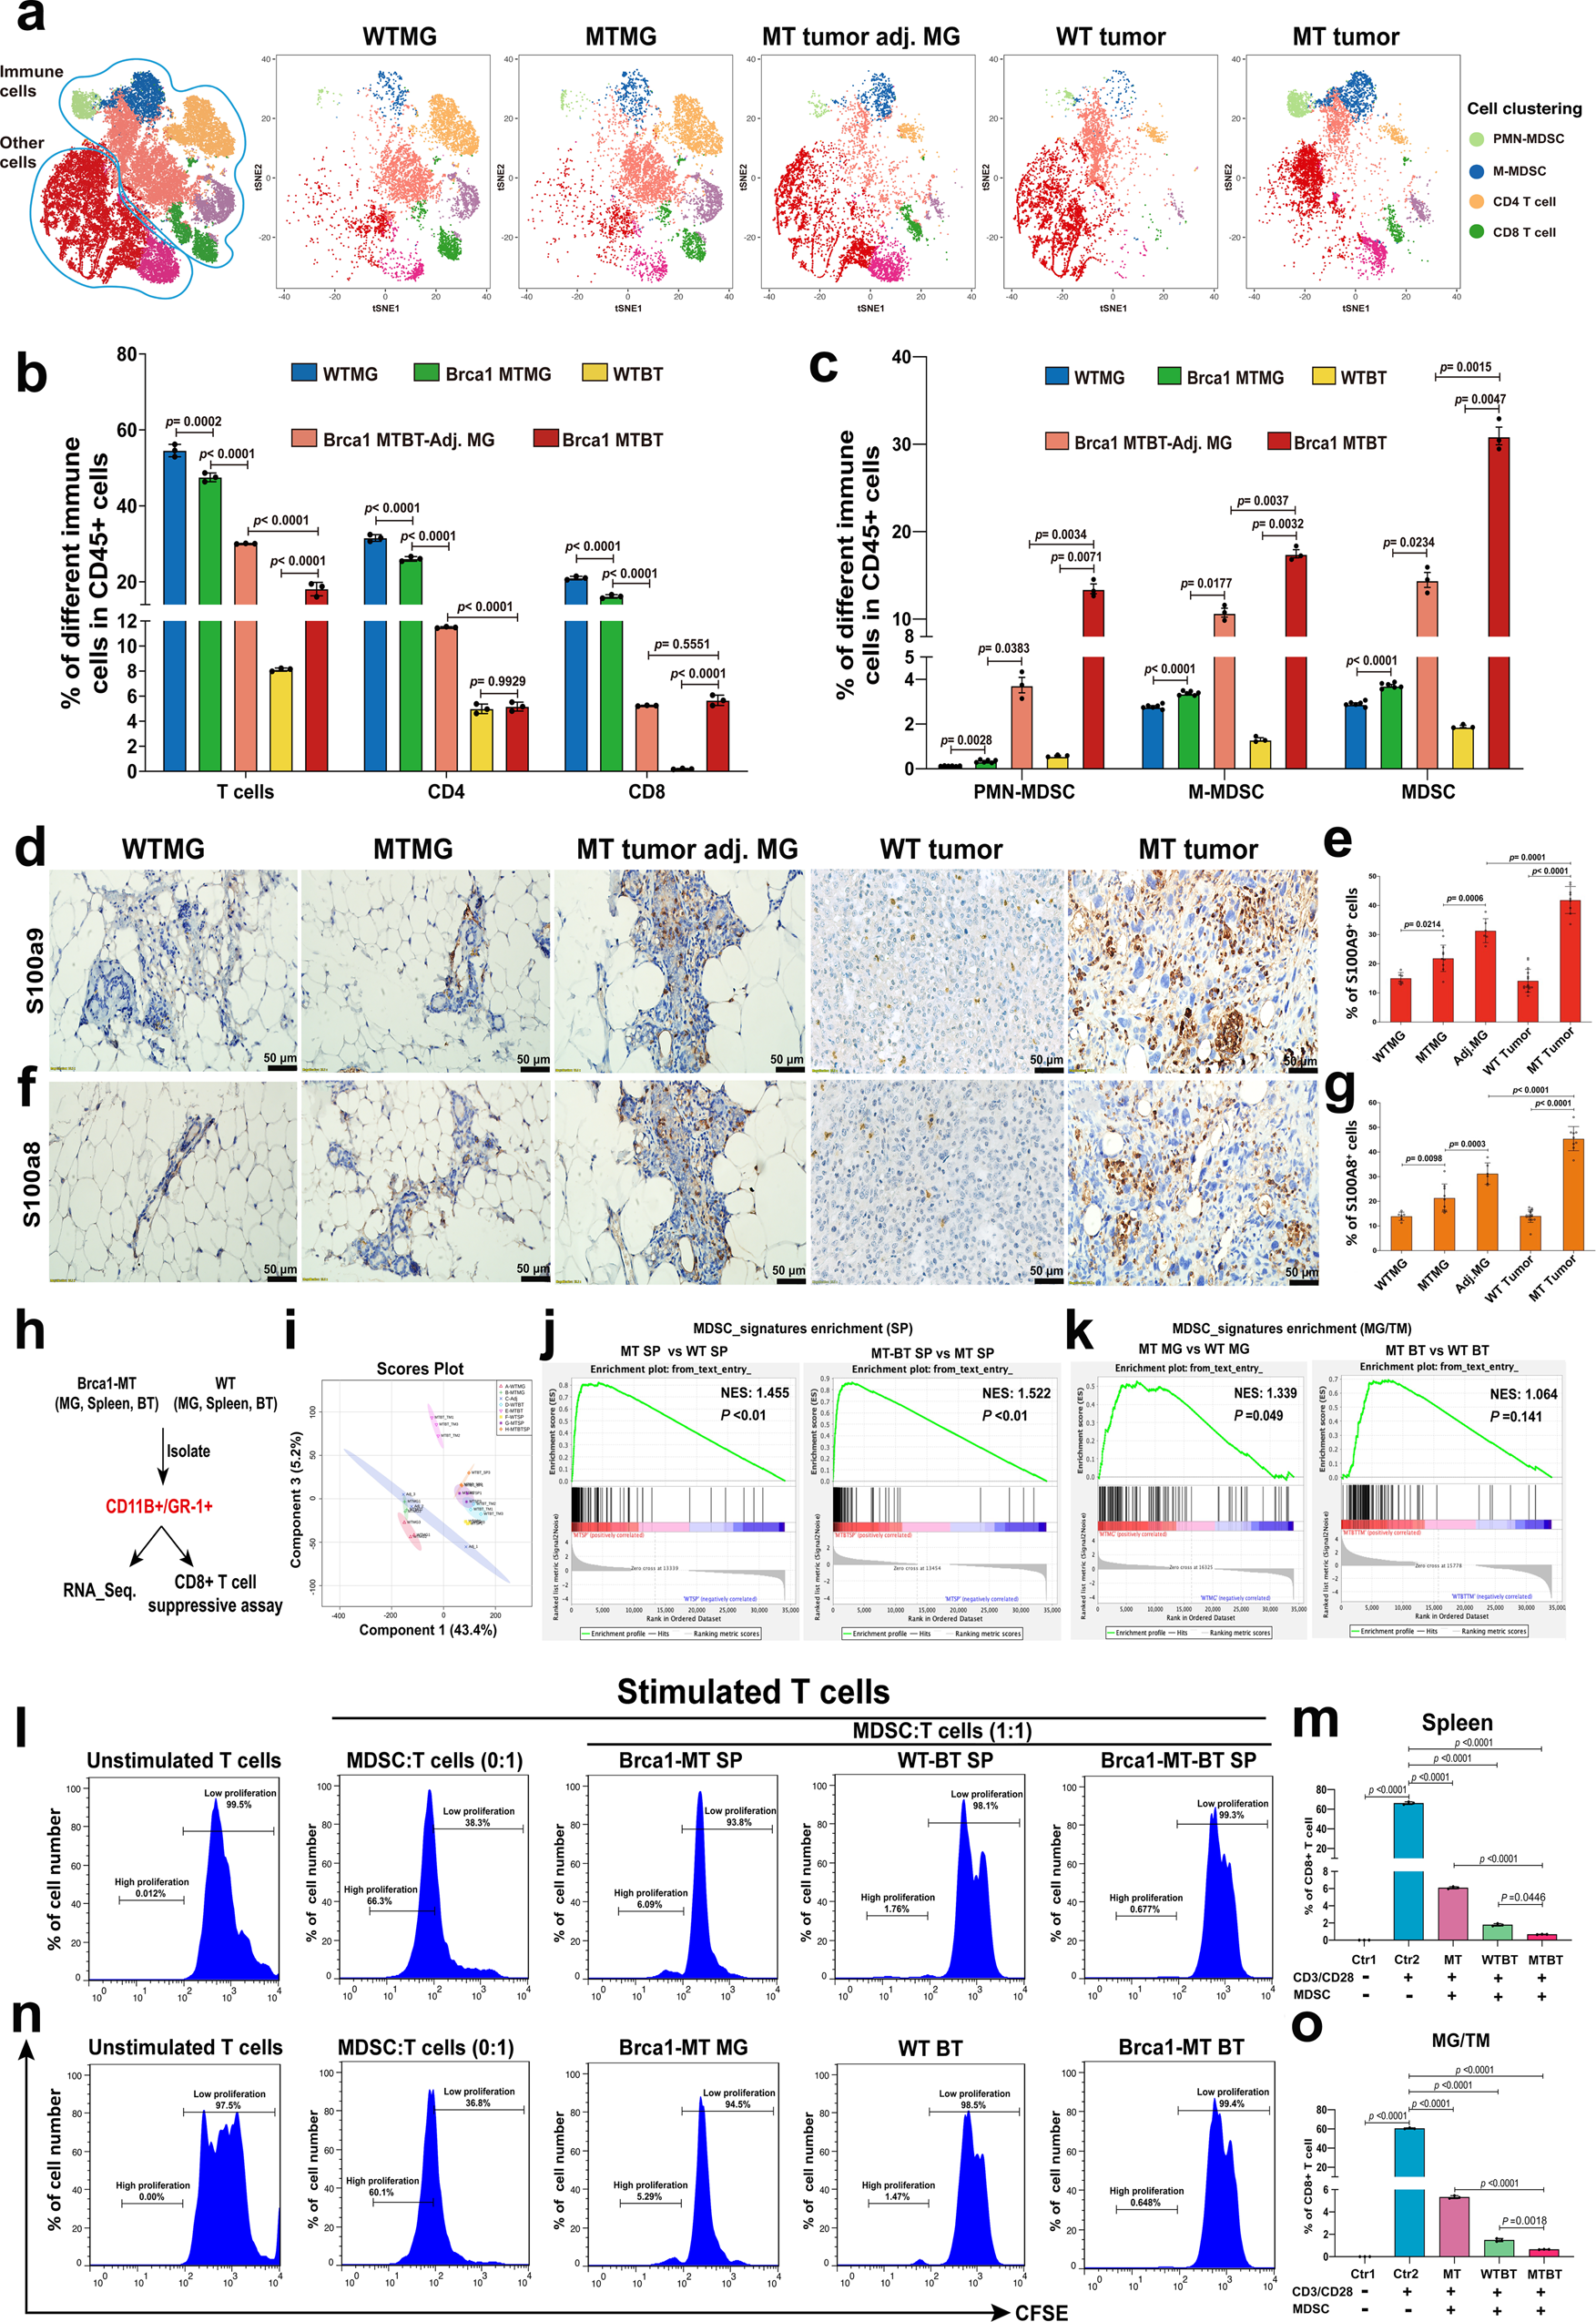 S100A9-CXCL12 activation in BRCA1-mutant breast cancer promotes an  immunosuppressive microenvironment associated with resistance to  immunotherapy | Nature Communications